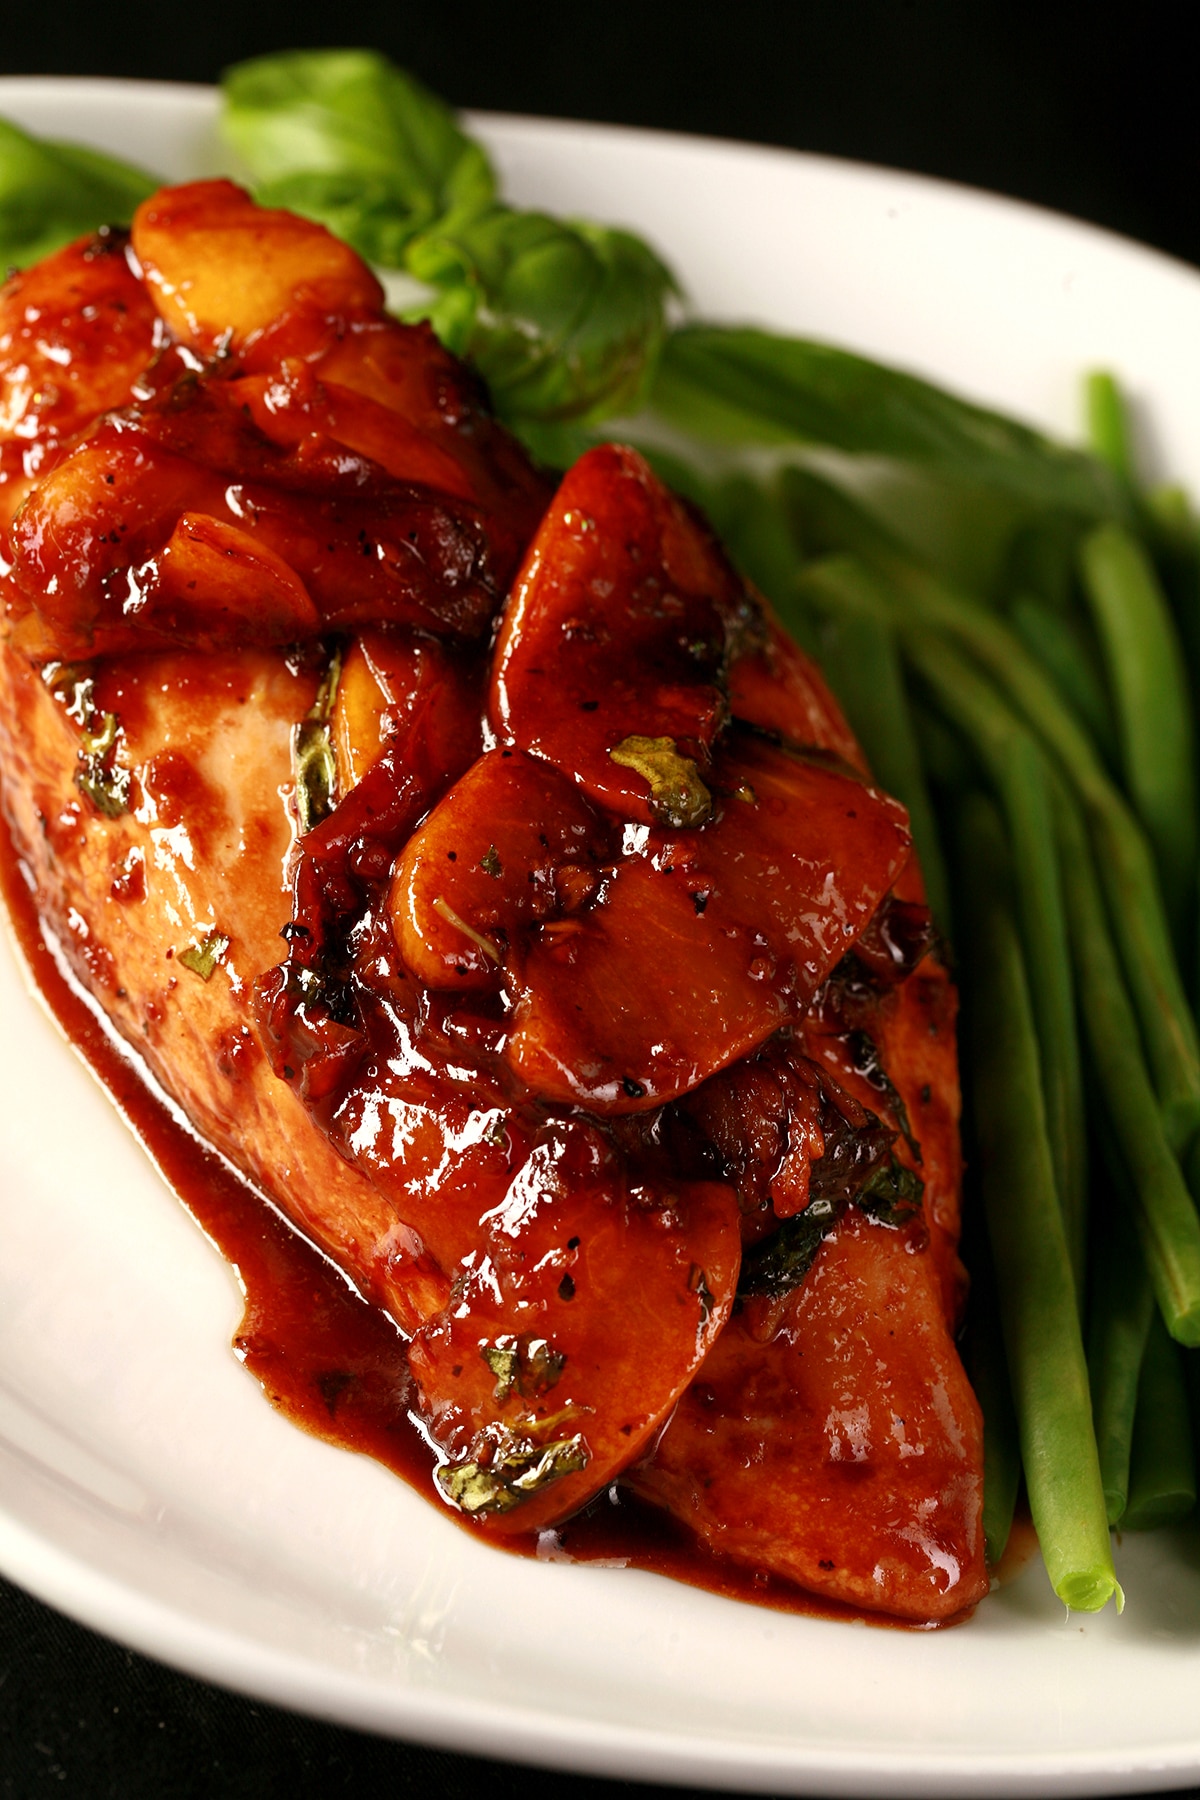 Plate with one chicken breast topped with sliced peaches and a reddish-brown sauce, with green beans on the side.